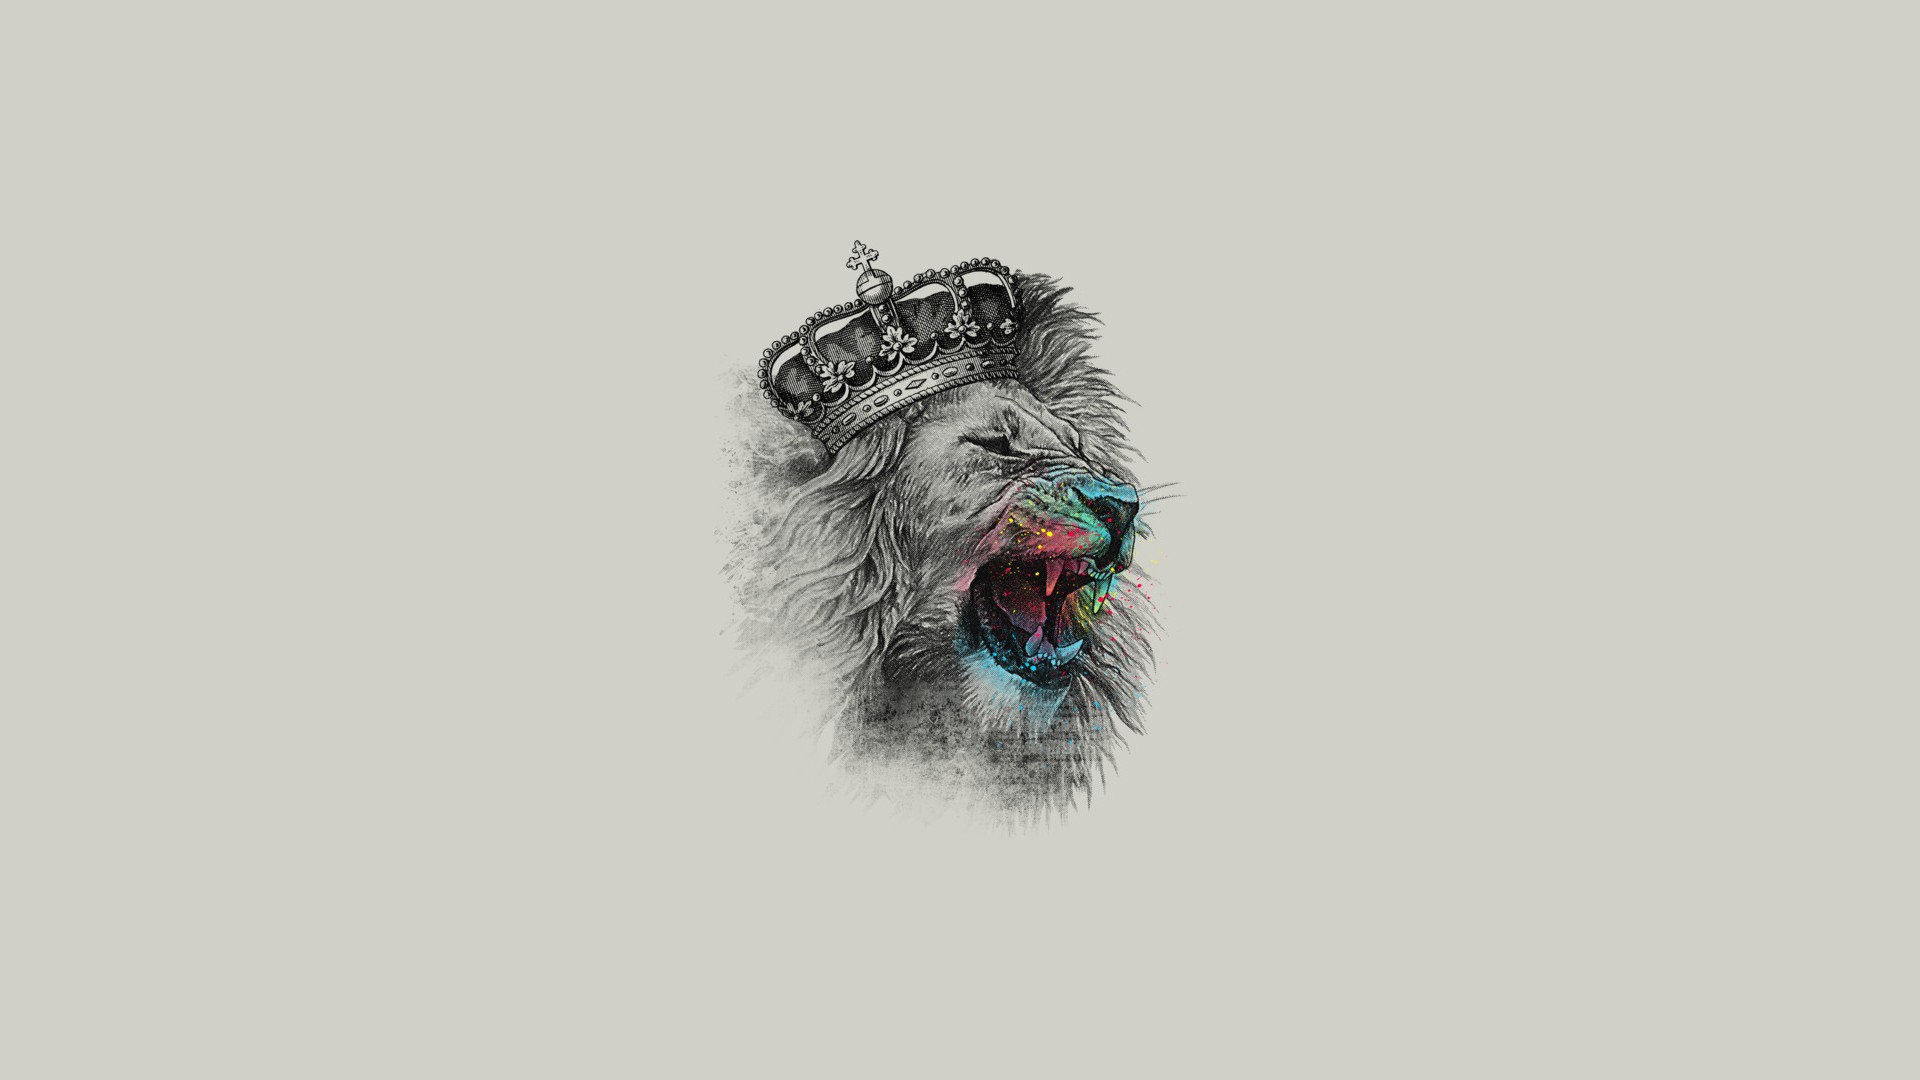 Lion With Crown Wallpapers